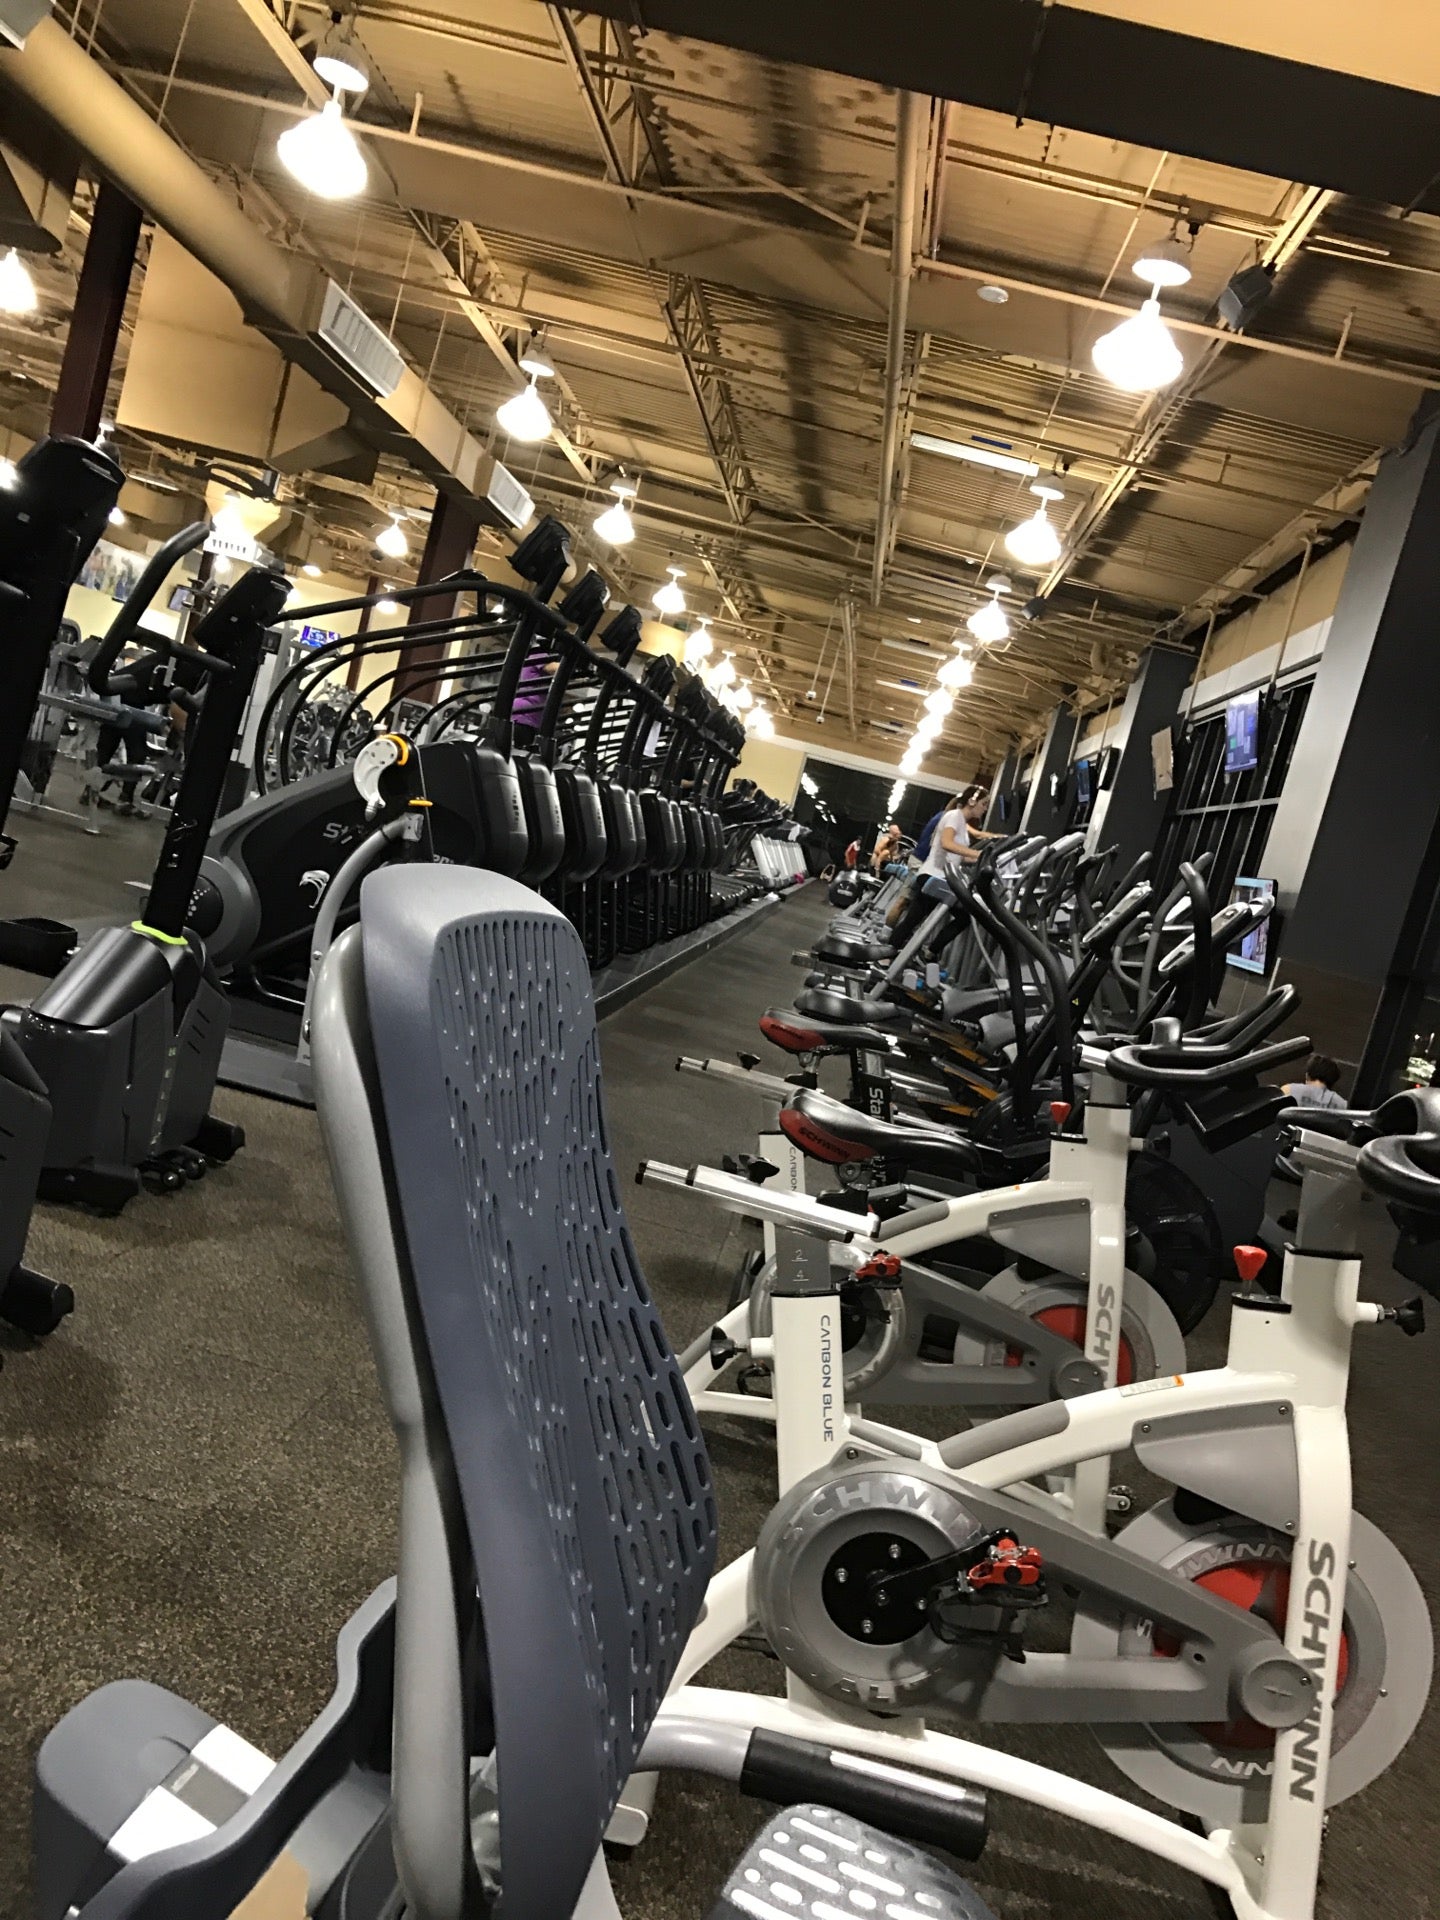 westfield topanga and the village 24 hour fitness｜TikTok Search